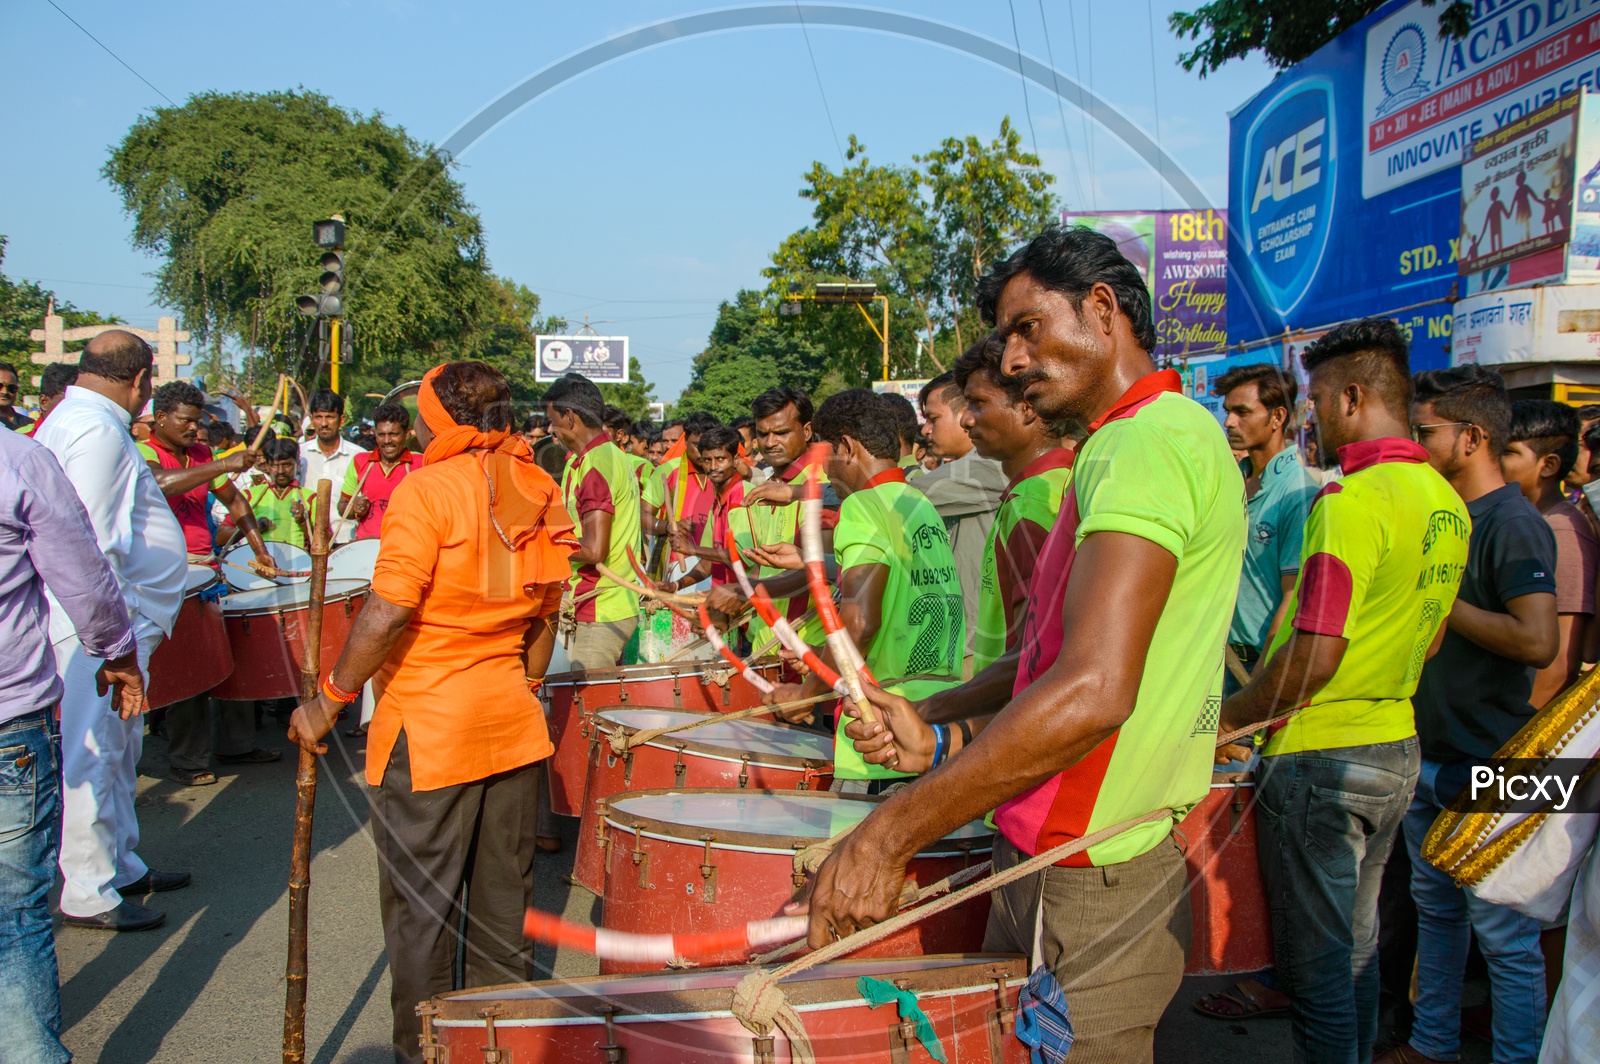 Indian  Folk Drum Players or Band Playing Drums on Streets During  Goddess Lakshmi Procession for Dussera  Navrathri